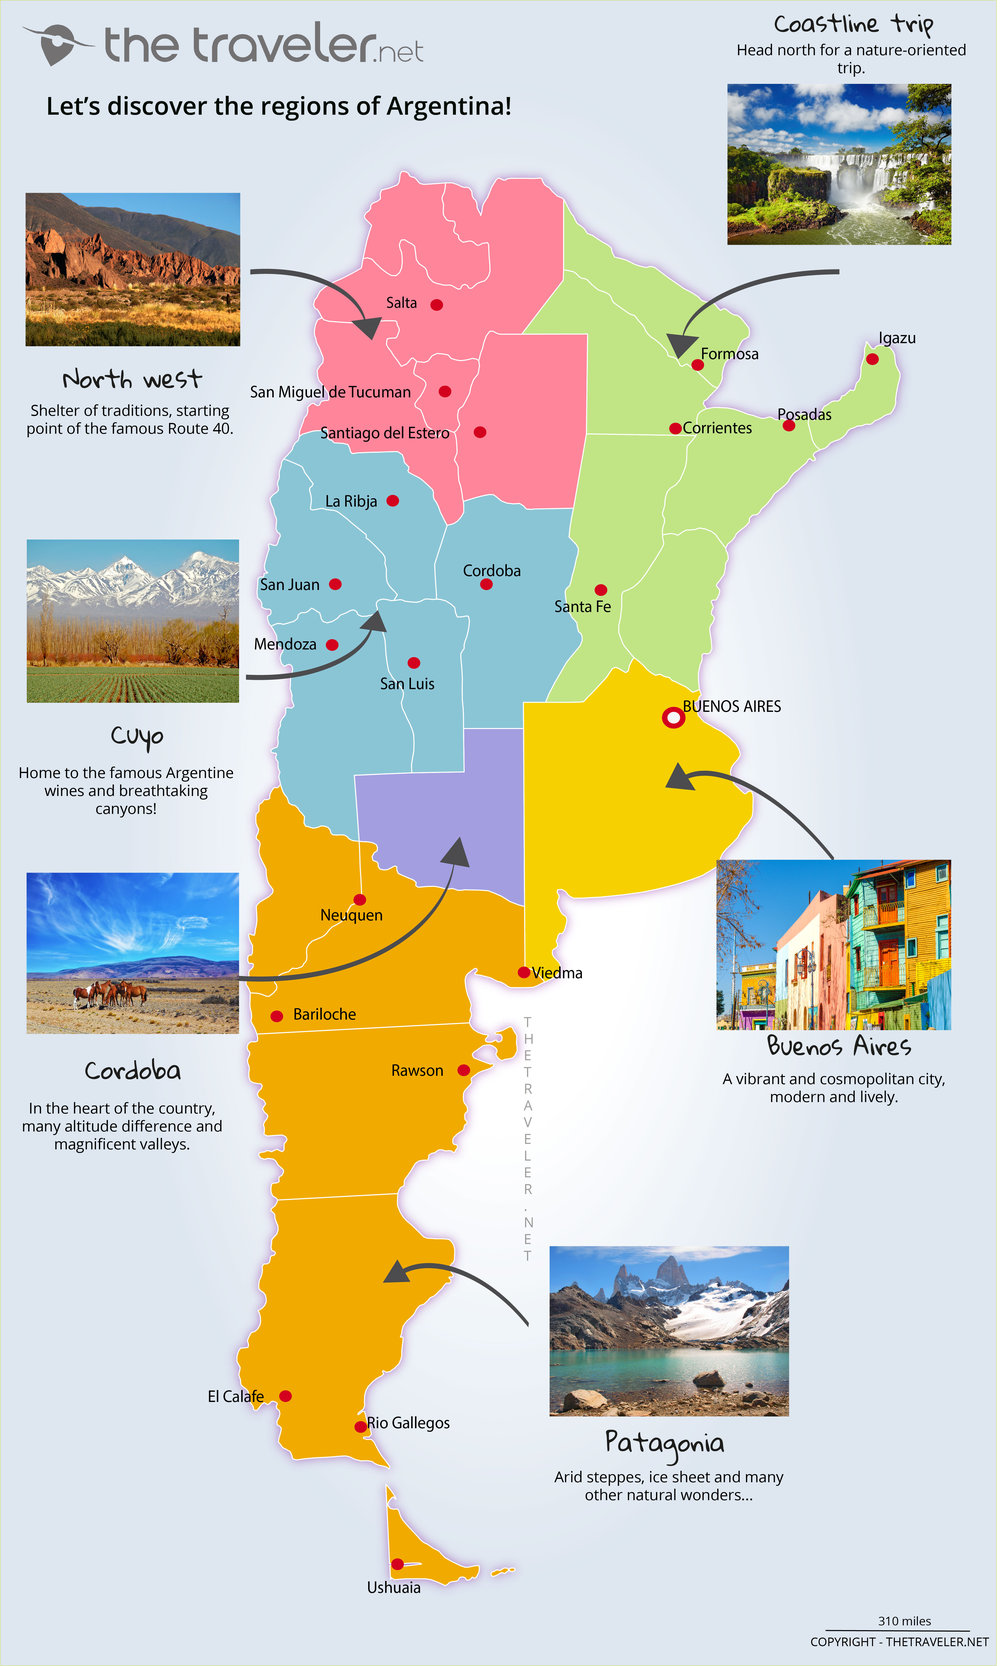 salta argentine carte Places To Visit Argentina Tourist Maps And Must See Attractions salta argentine carte